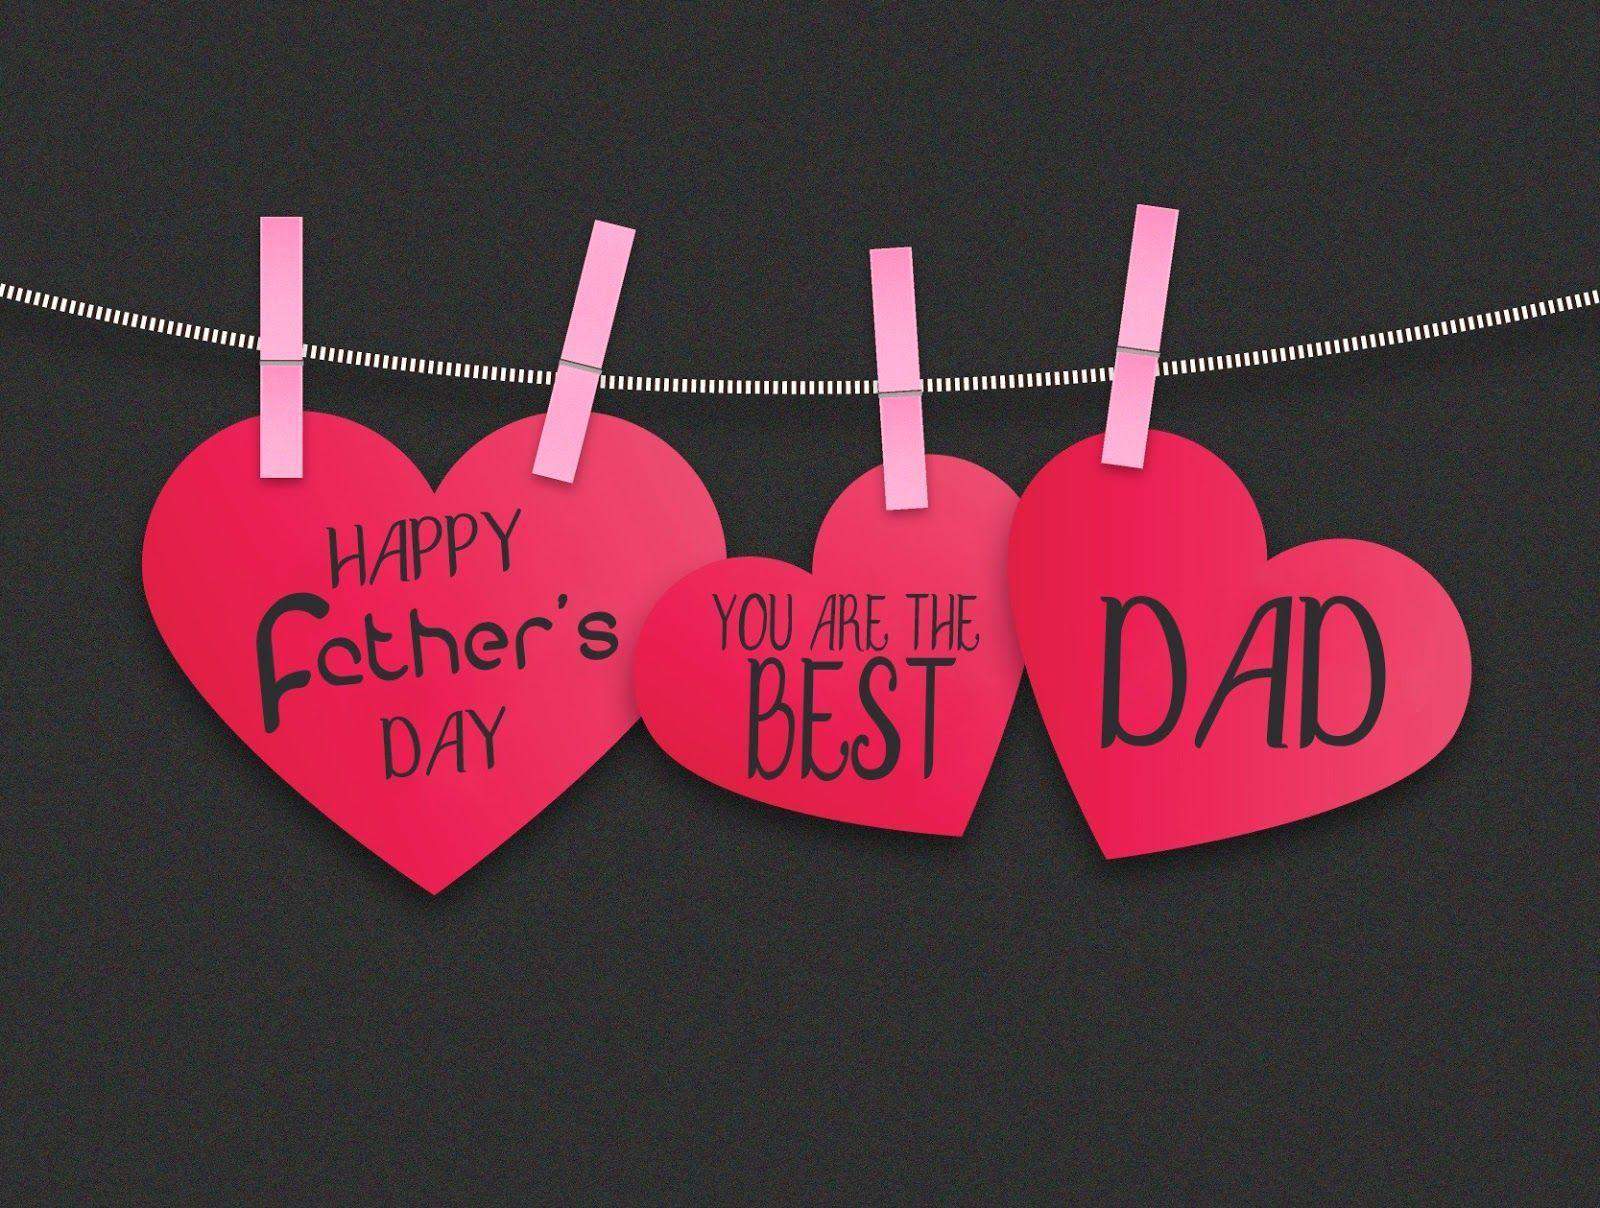 Happy Fathers Day Wallpaper